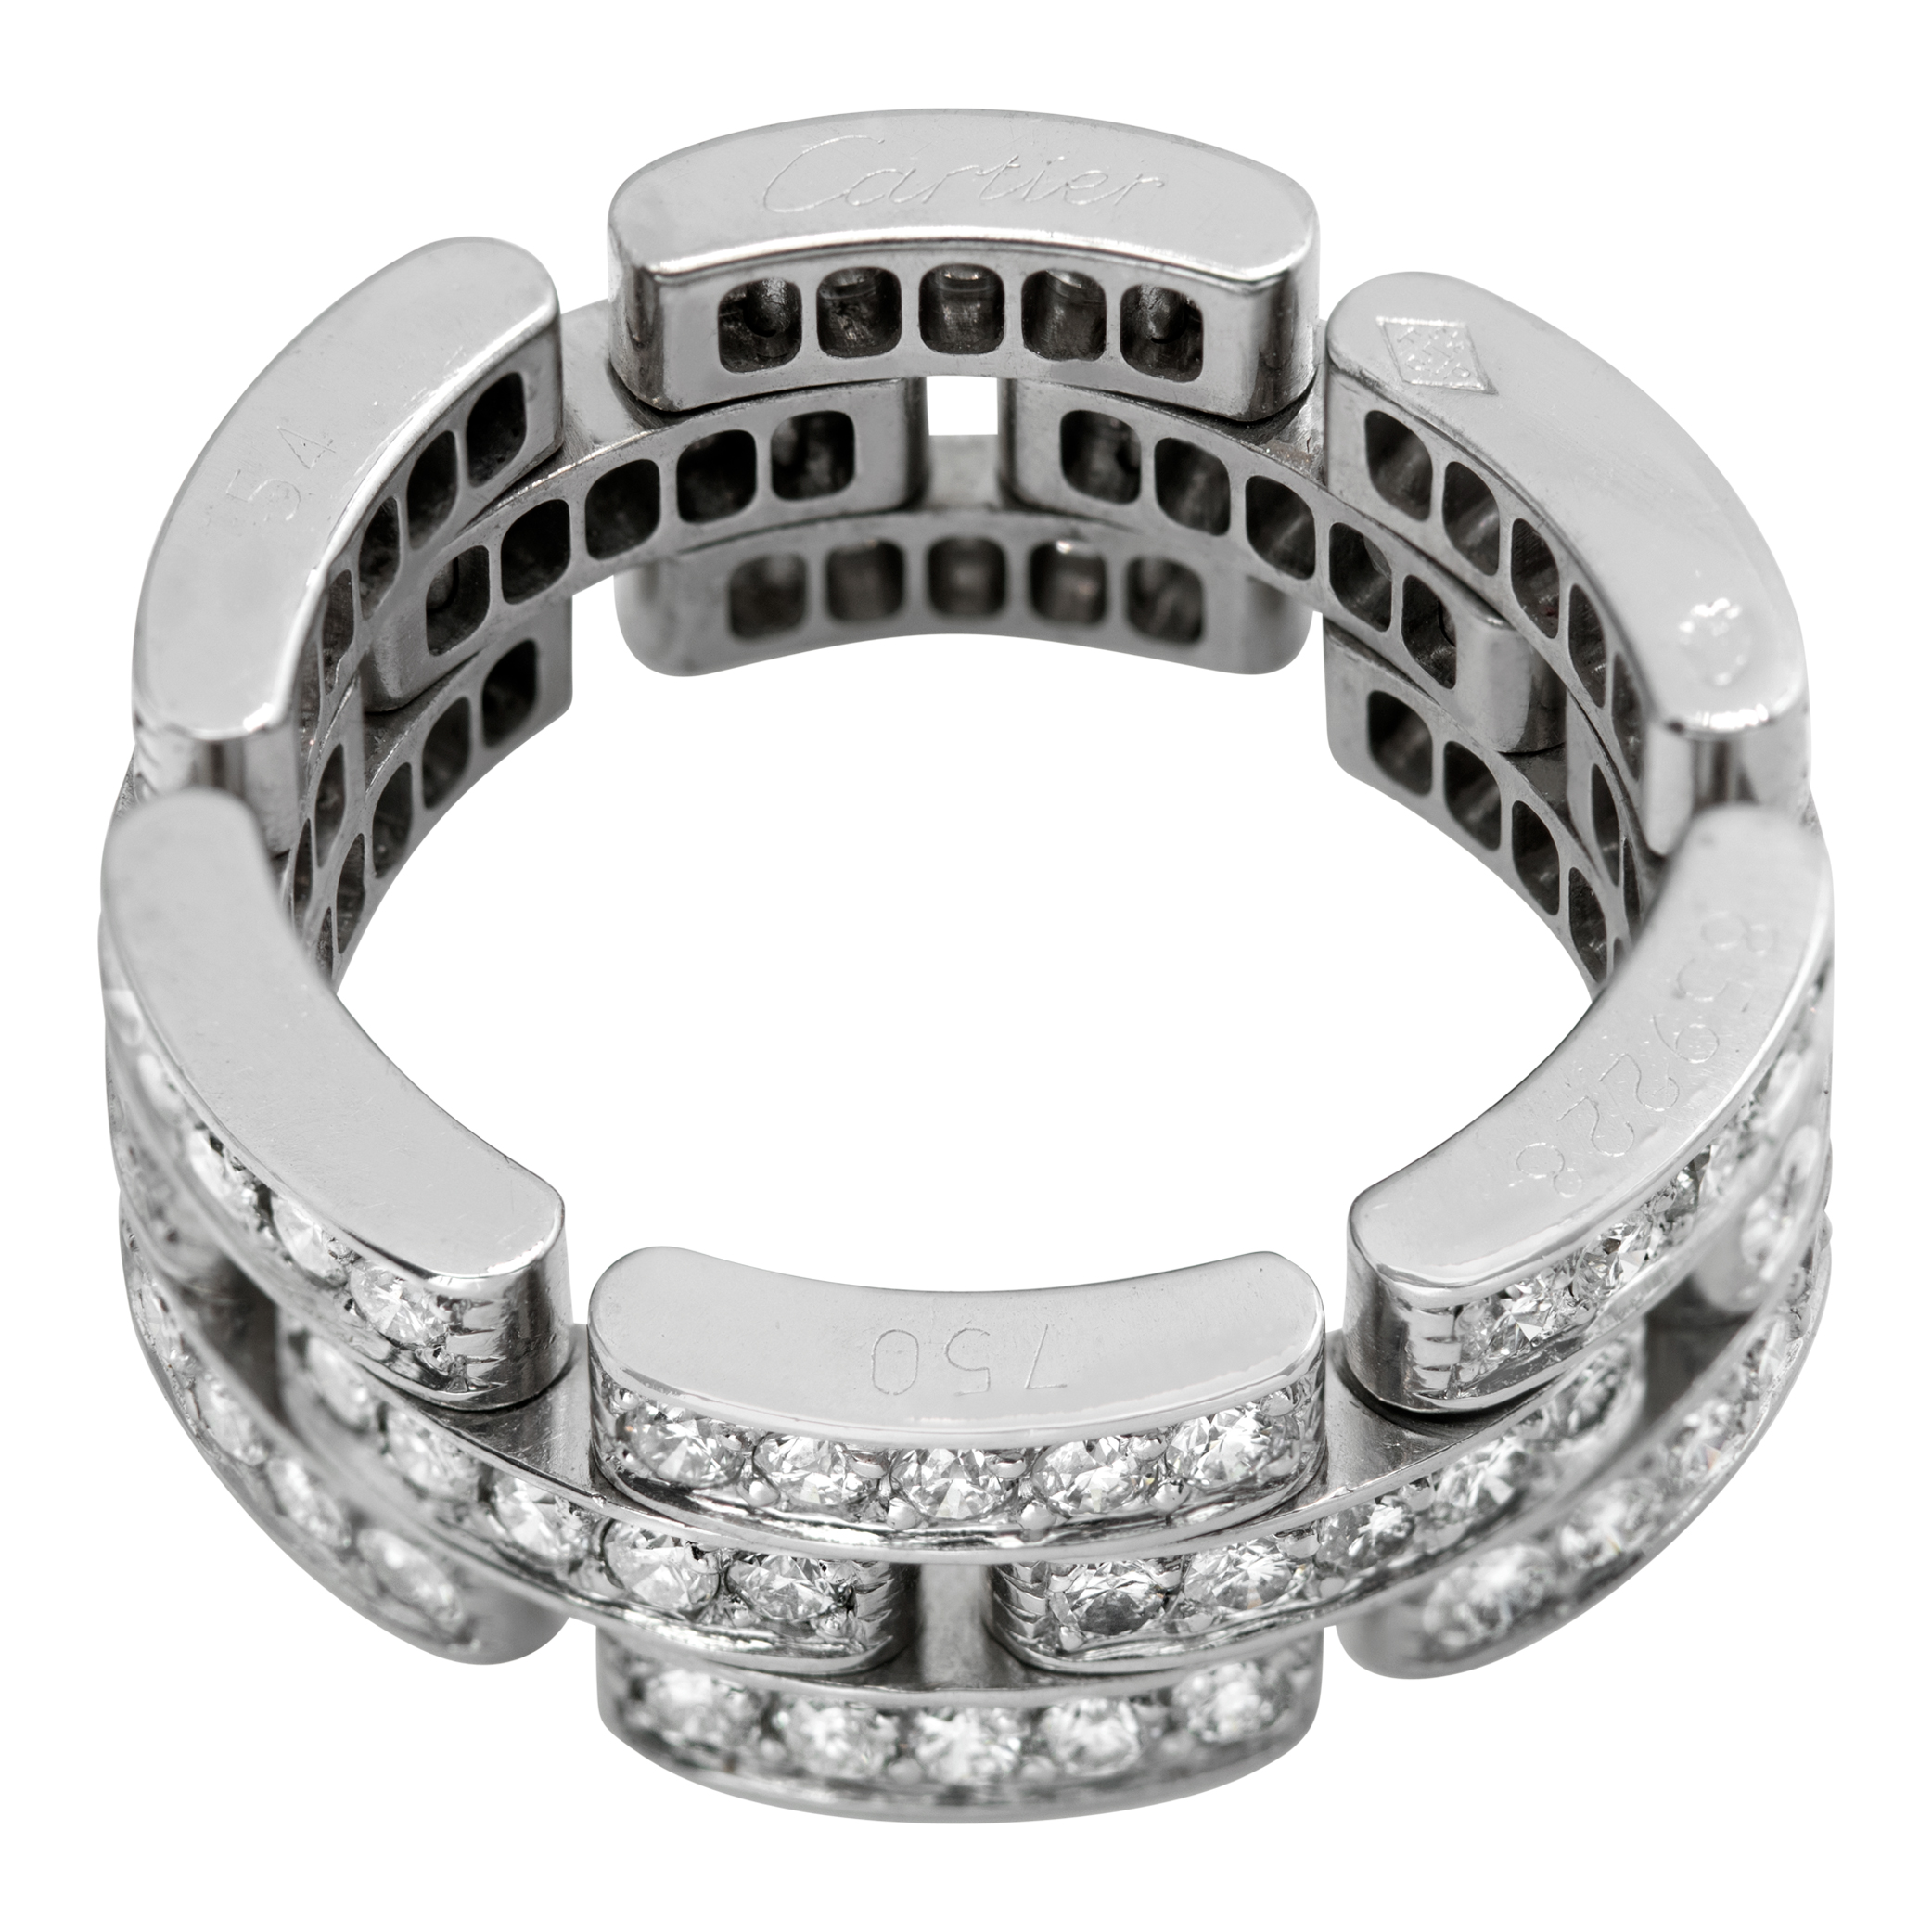 Cartier Maillon Panthere diamond ring in 18k wg with 1.40 cts in diamonds size 7 (Stones)